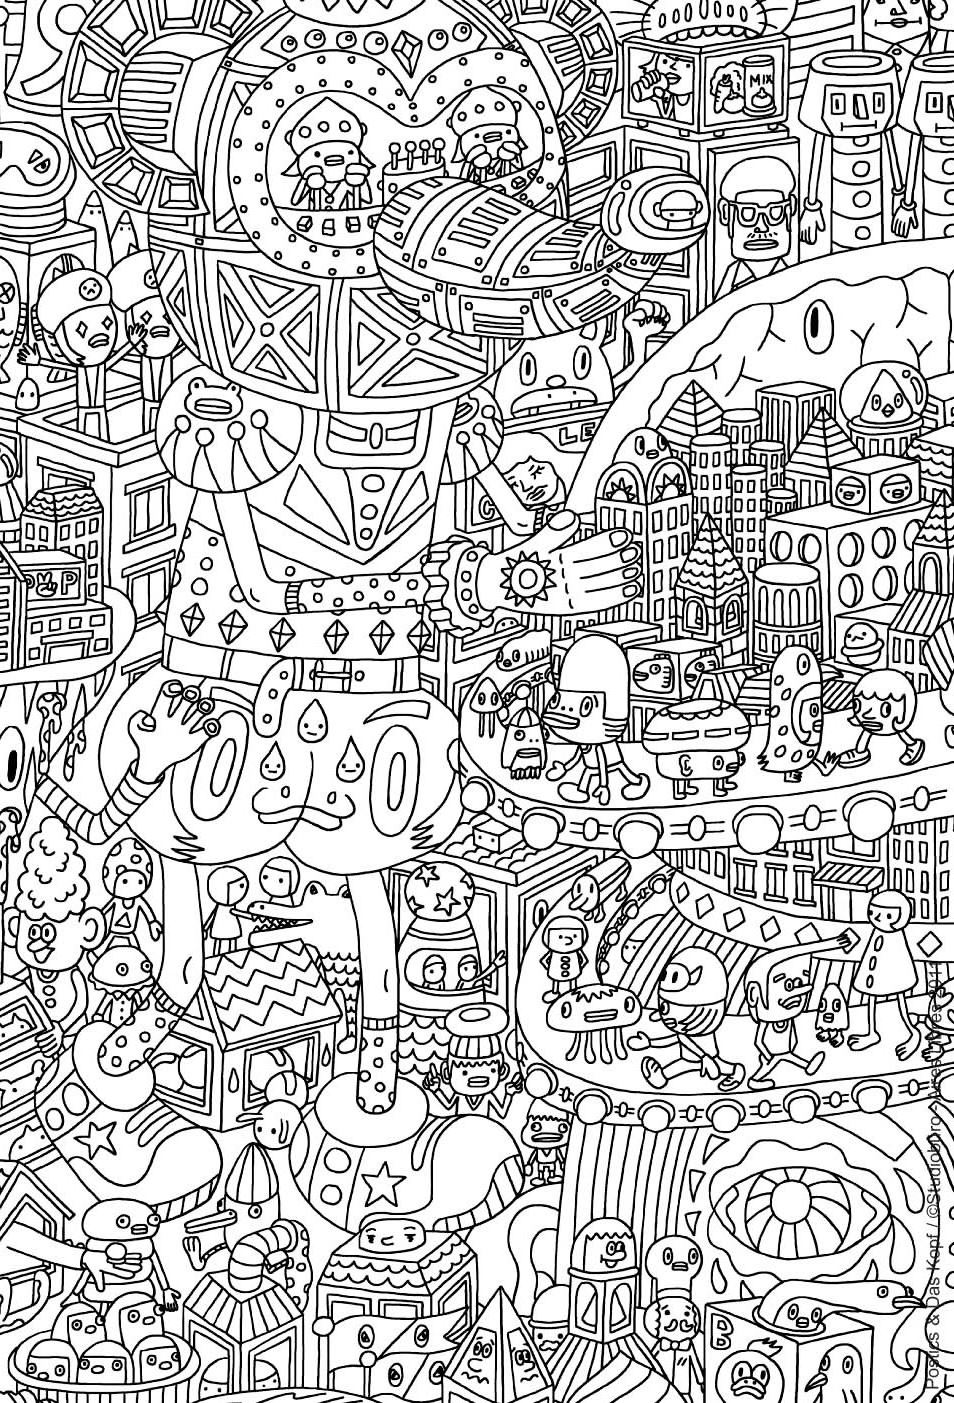 Simple Doodle Art coloring page for kids